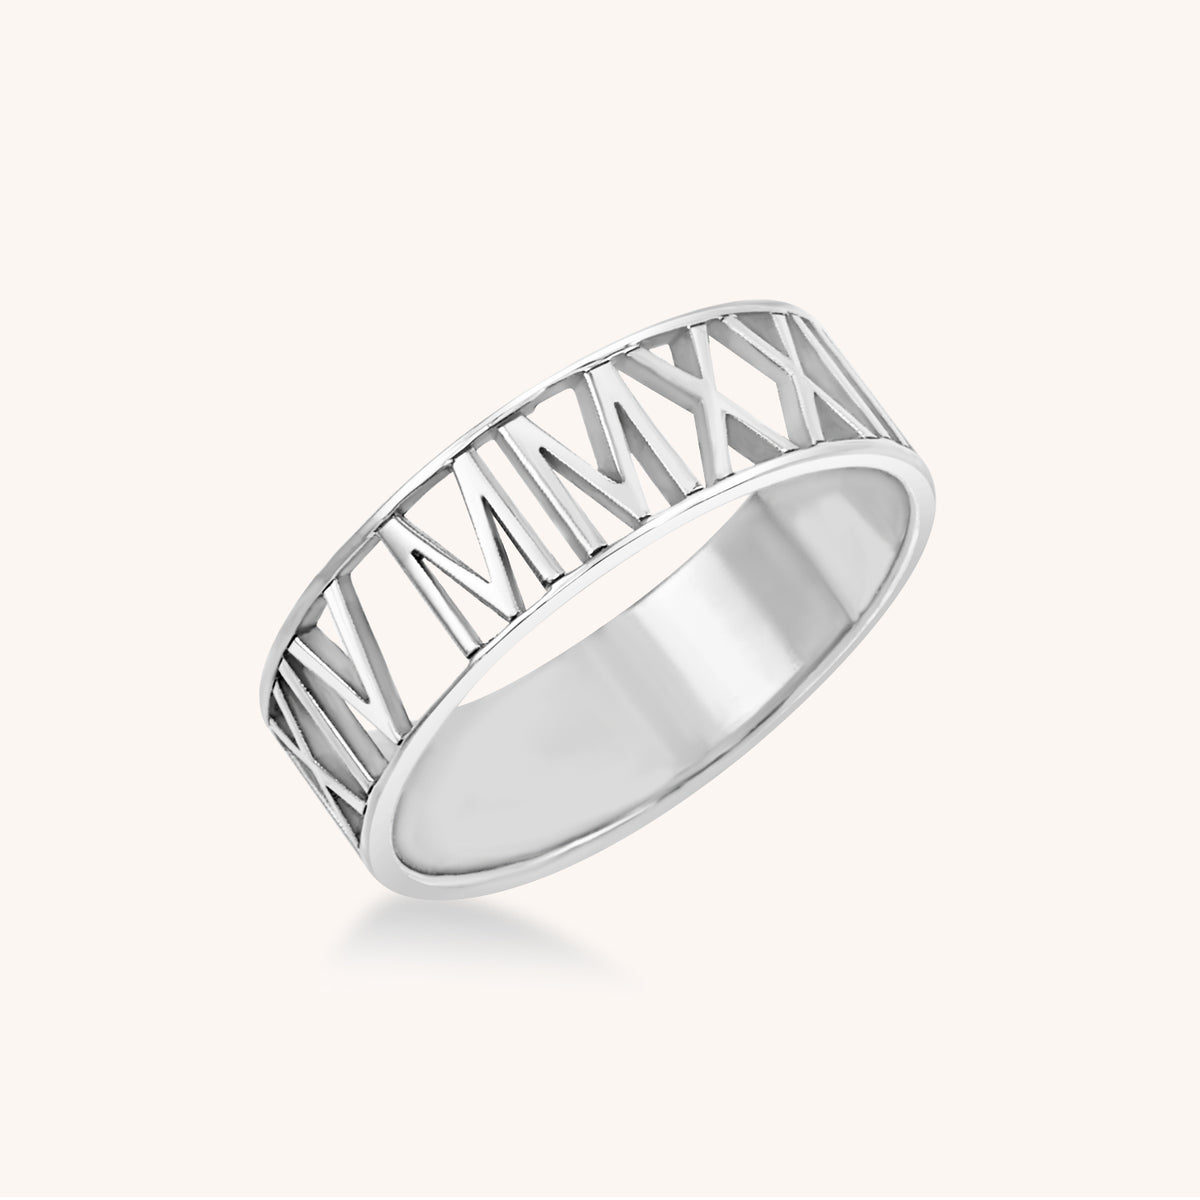 1922 Roman Numeral Year Ring